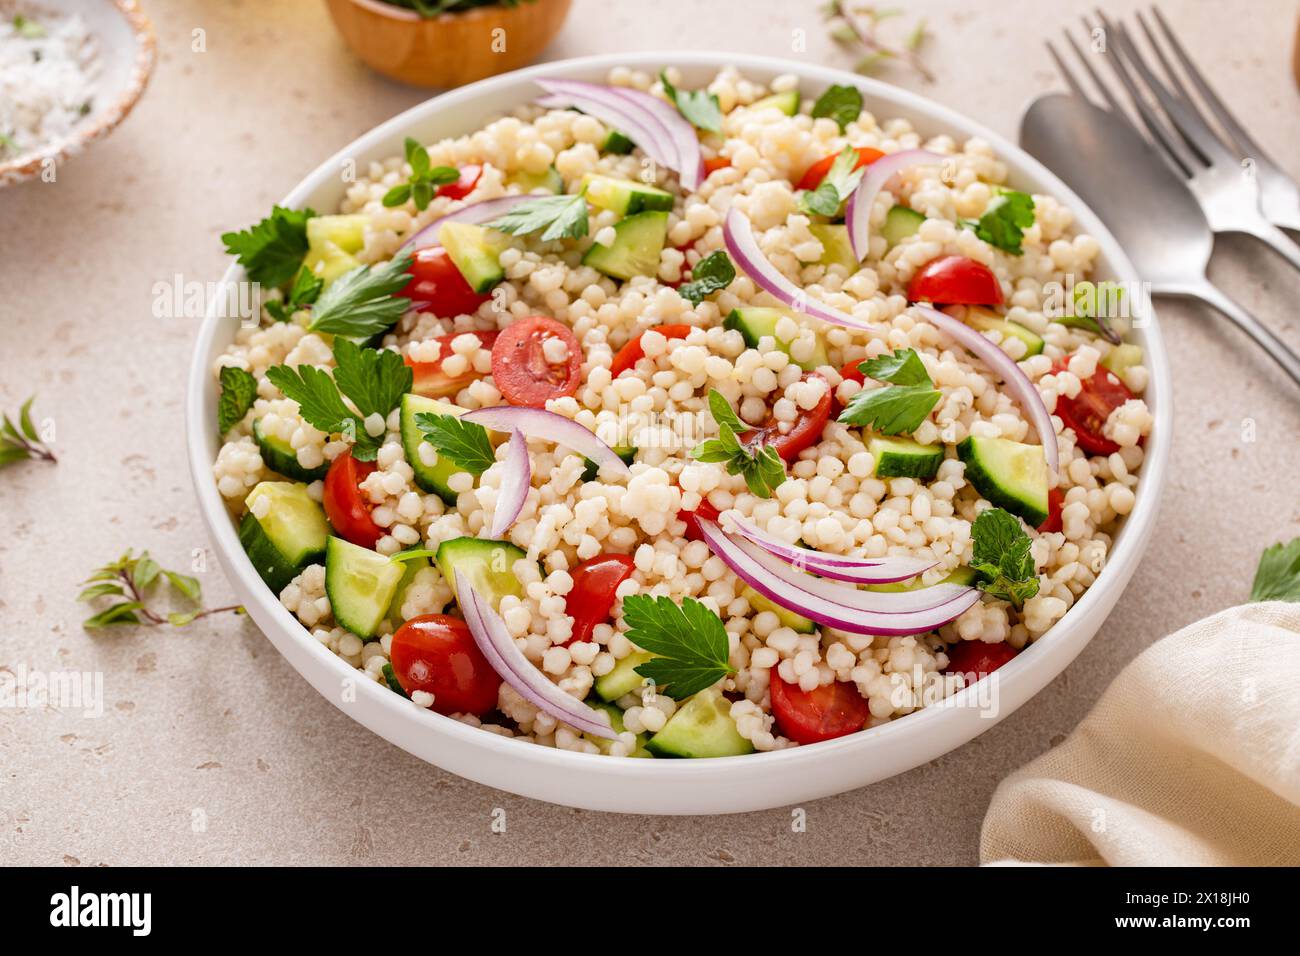 Pearl couscous salad with fresh vegetables and herbs in a serving bowl, healthy side dish idea Stock Photo